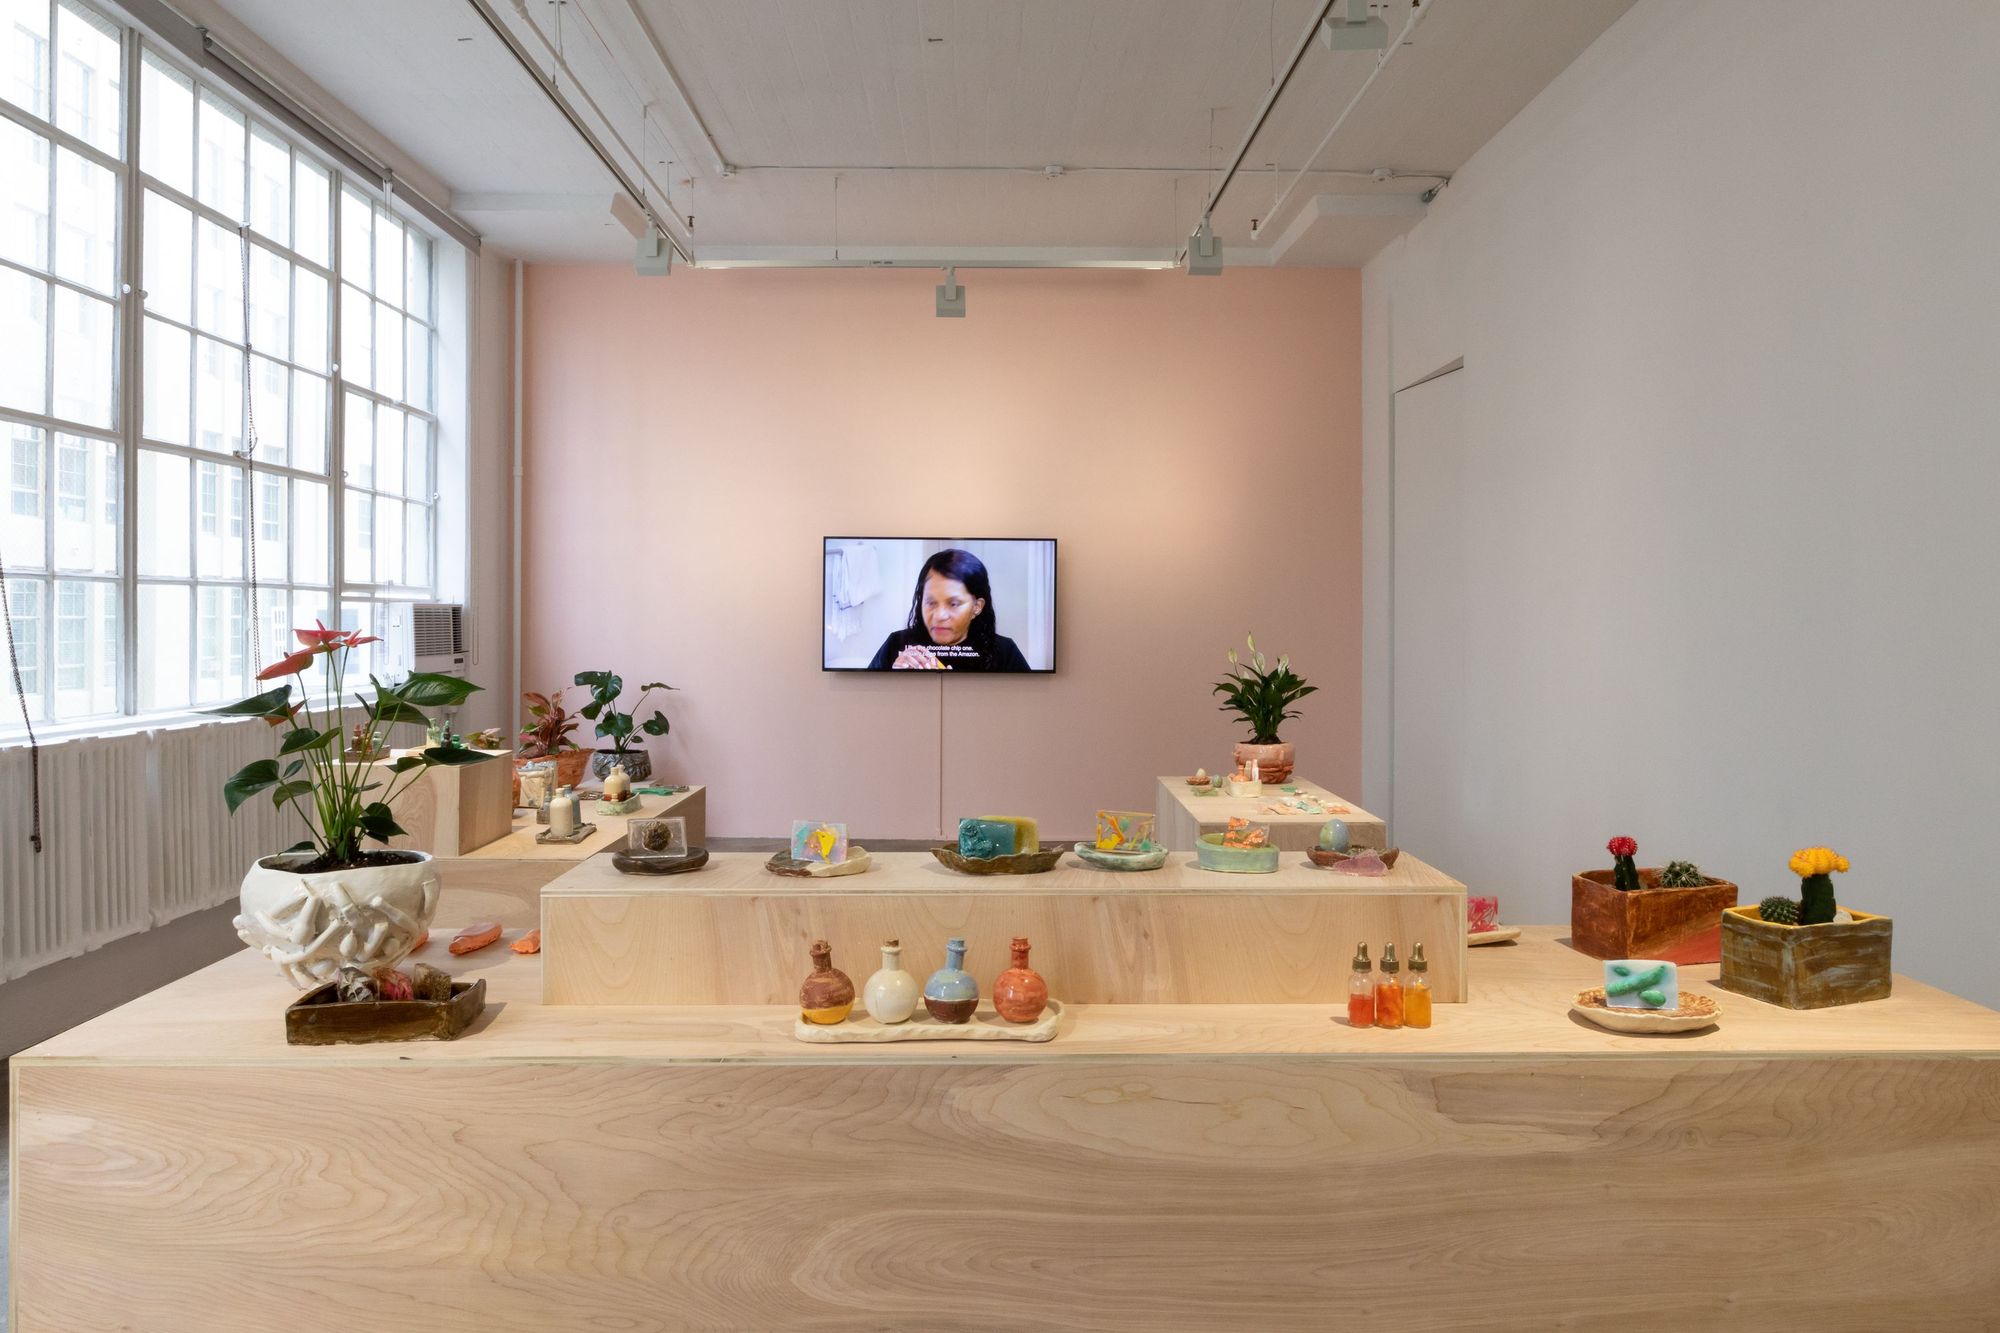 Installation view of Ilana Harris-Babou, "Decision Fatigue," Hesse Flatow, February 20 - May 16, 2020. Courtesy of the artist and Hesse Flatow.